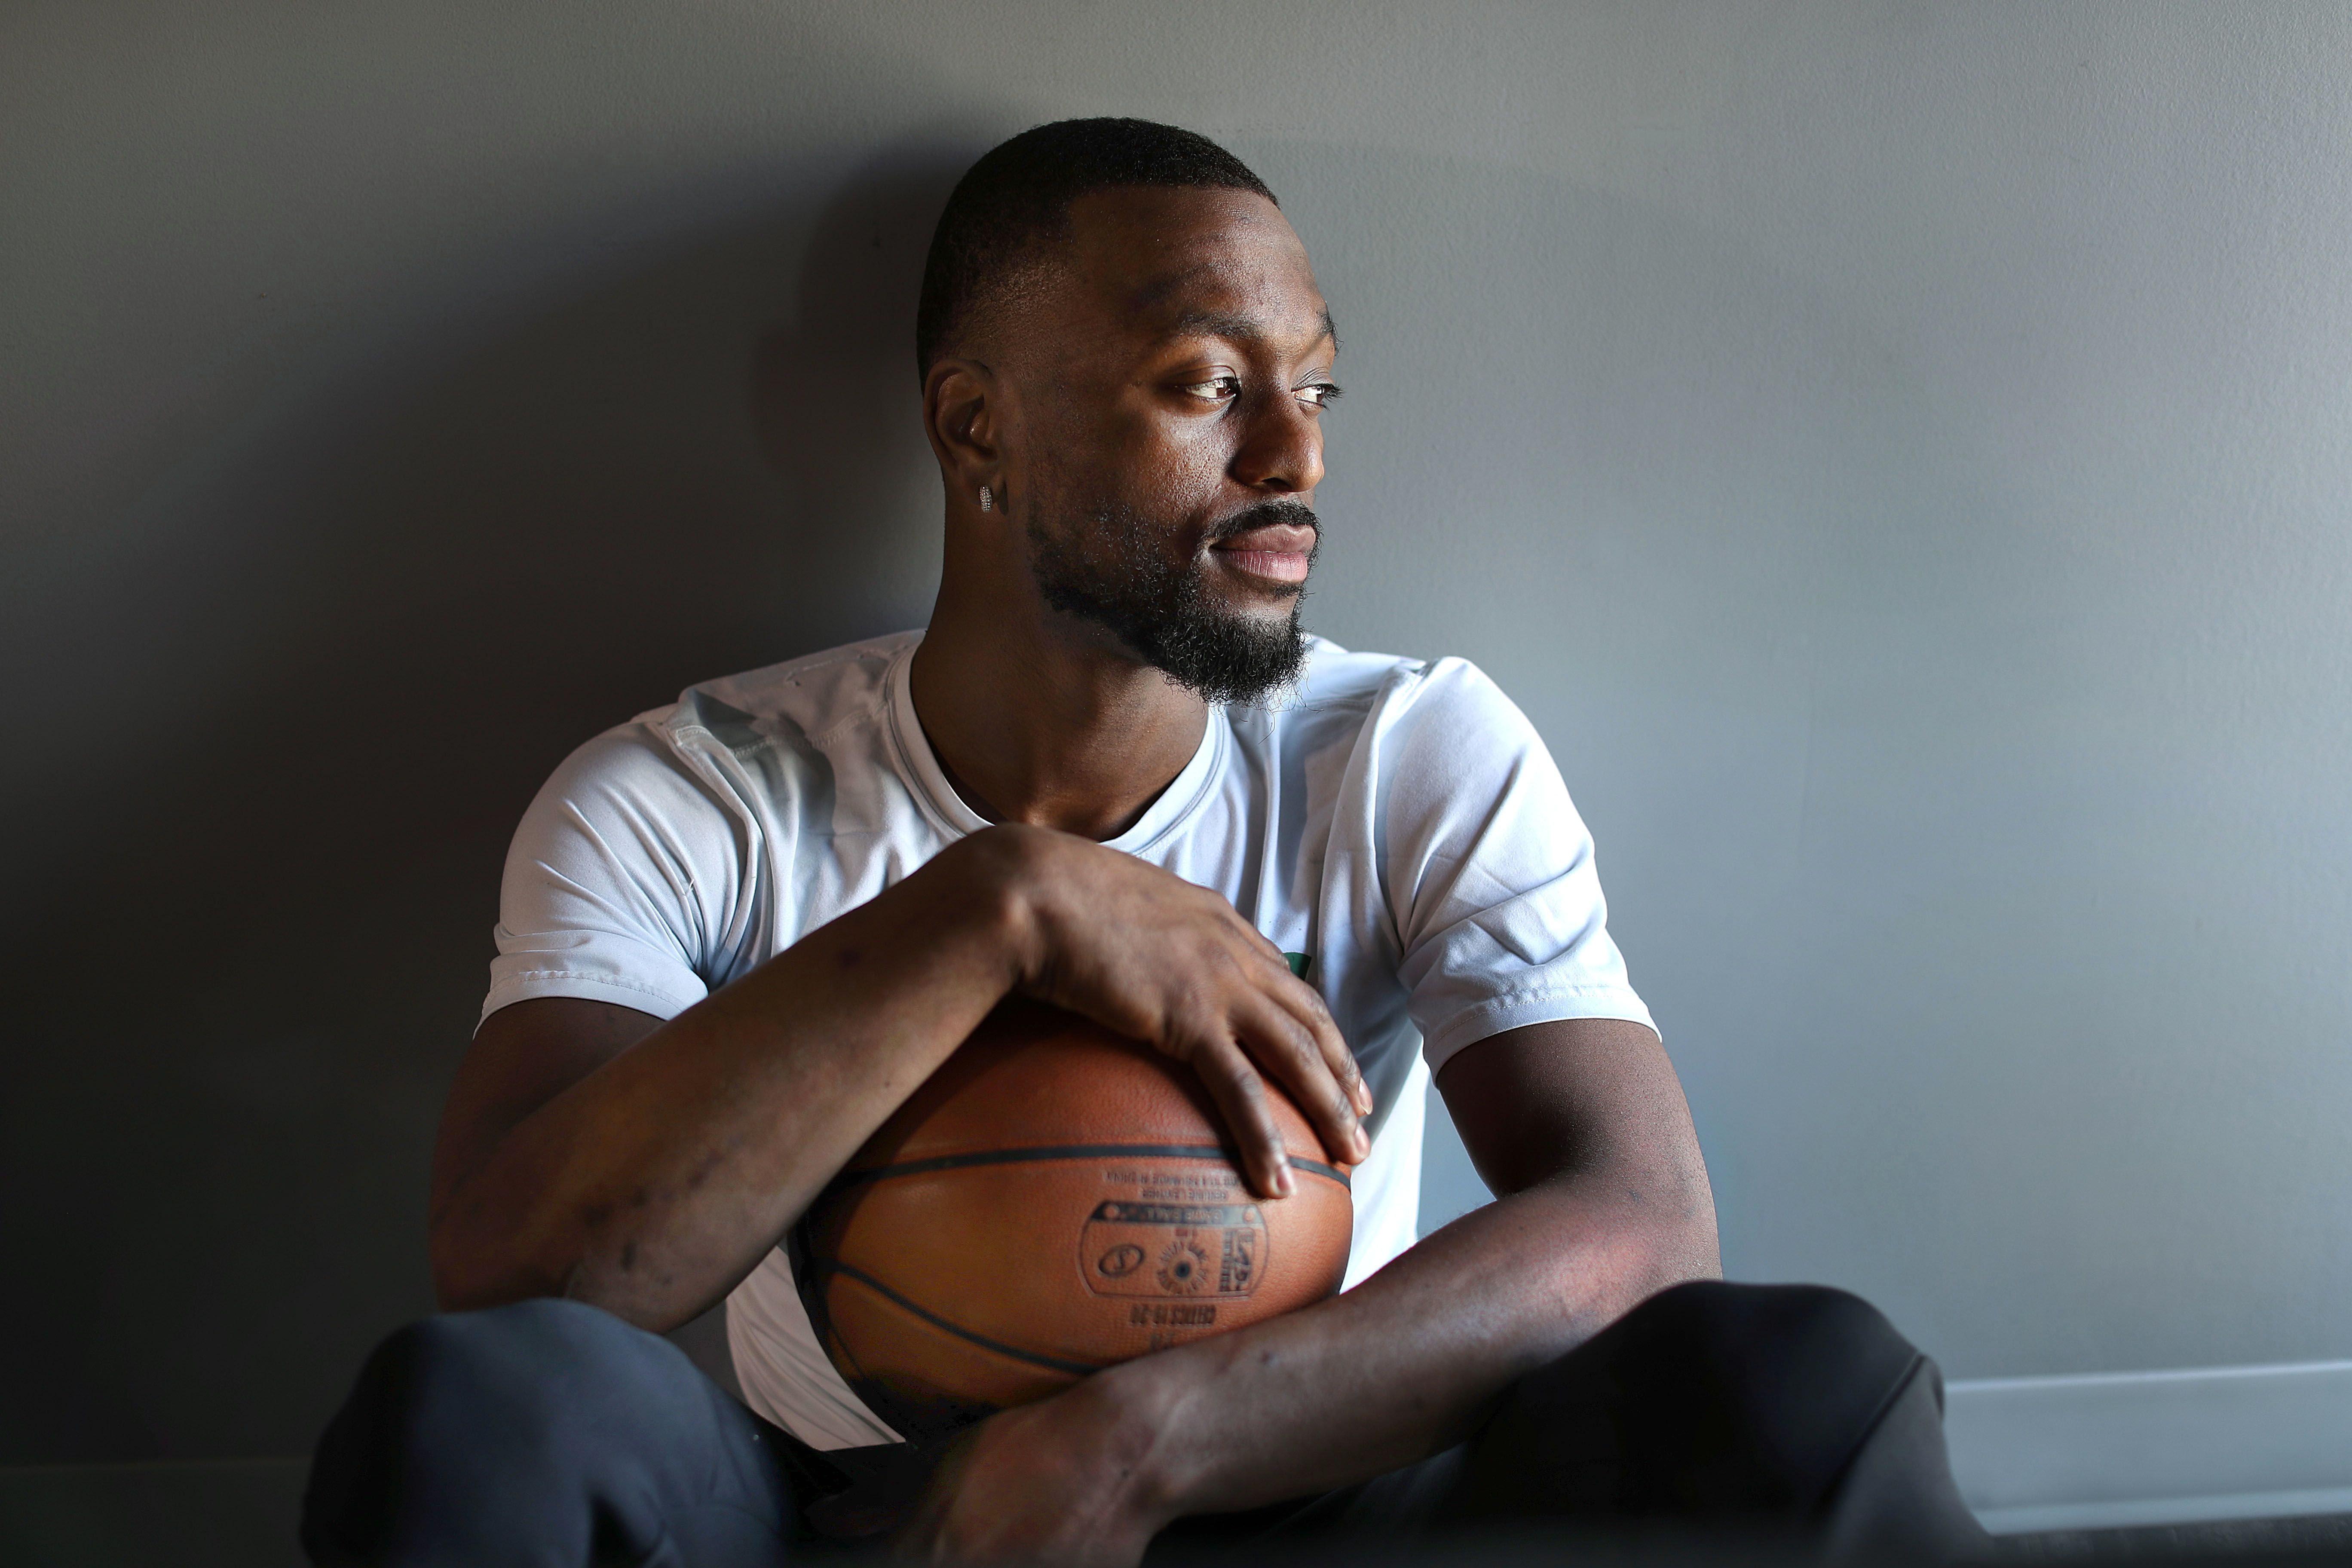 Ex-NBA All-Star Kemba Walker is chasing his next chance. That